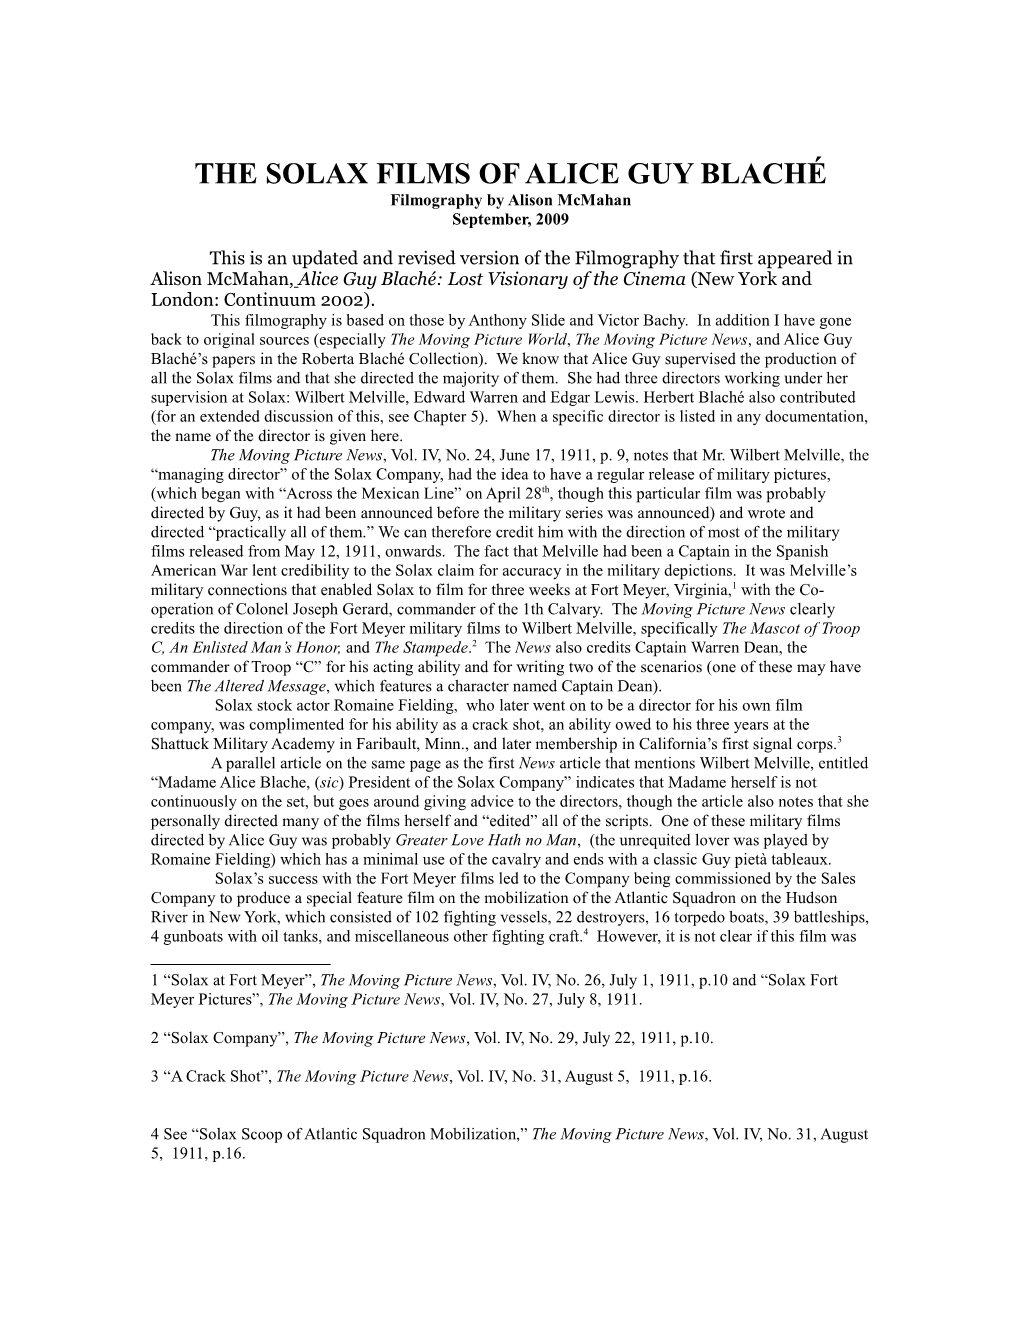 THE SOLAX FILMS of ALICE GUY BLACHÉ Filmography by Alison Mcmahan September, 2009